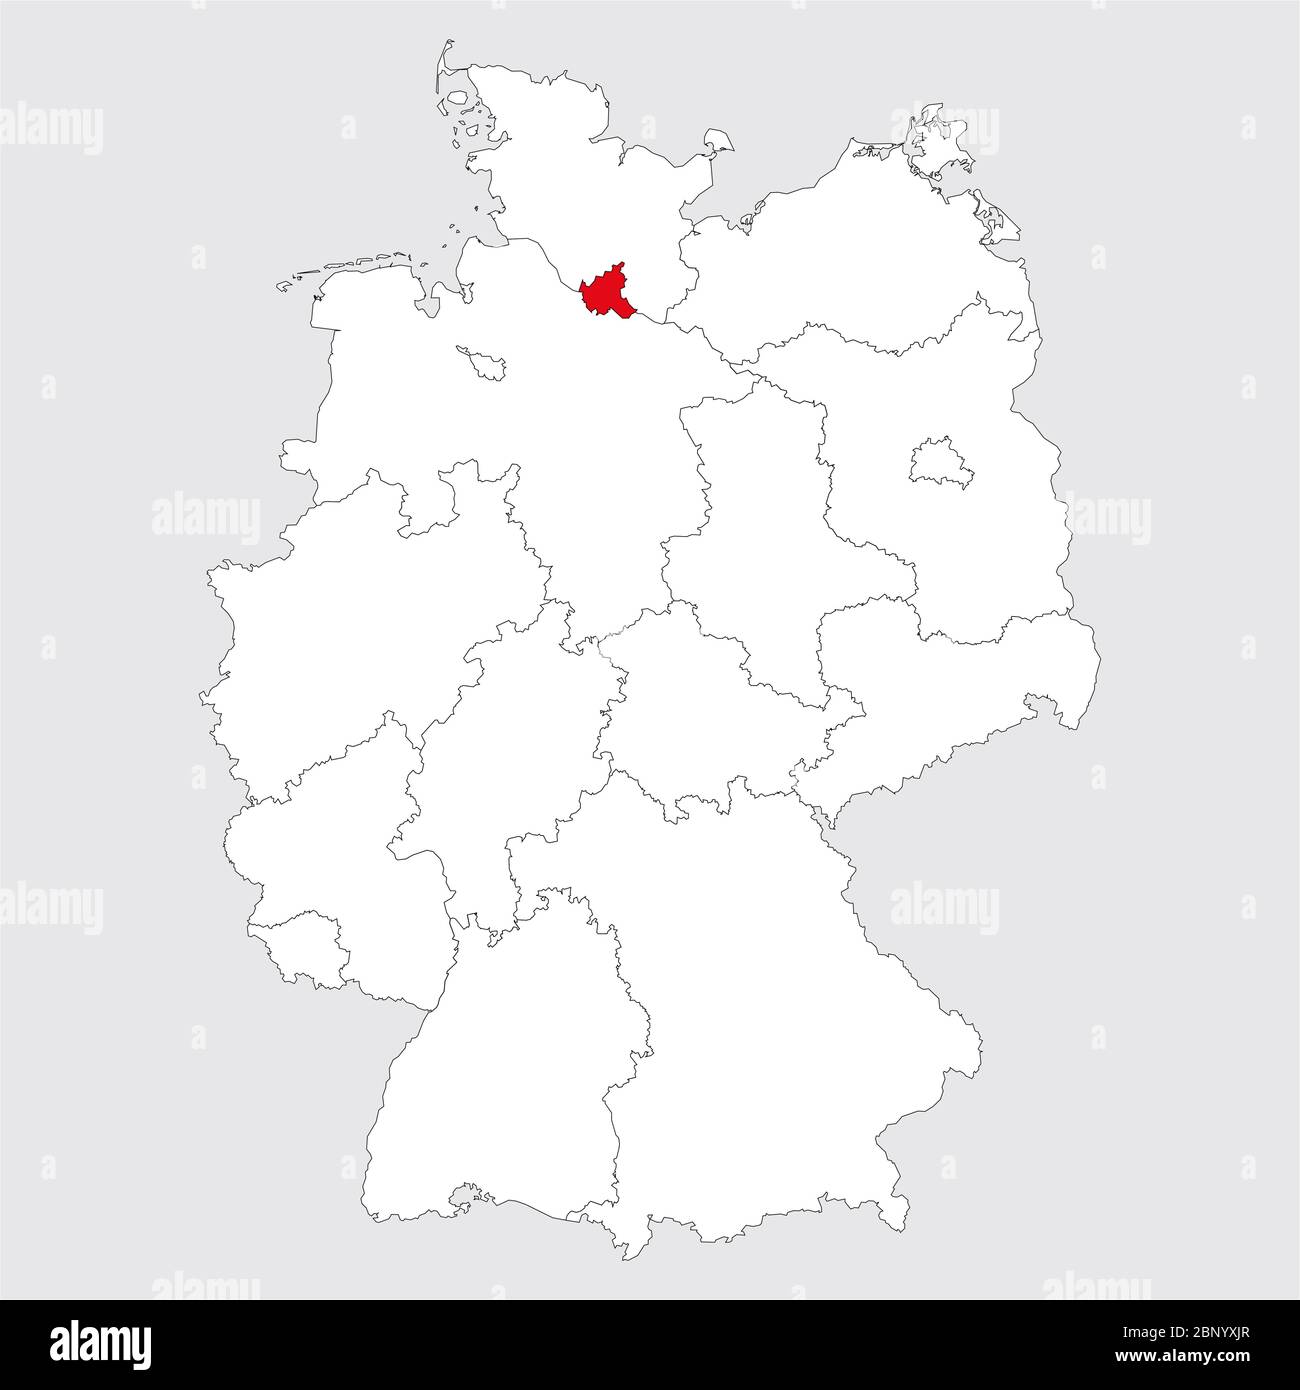 Hamburg province highlighted on germany map. Gray background. German political map. Stock Vector